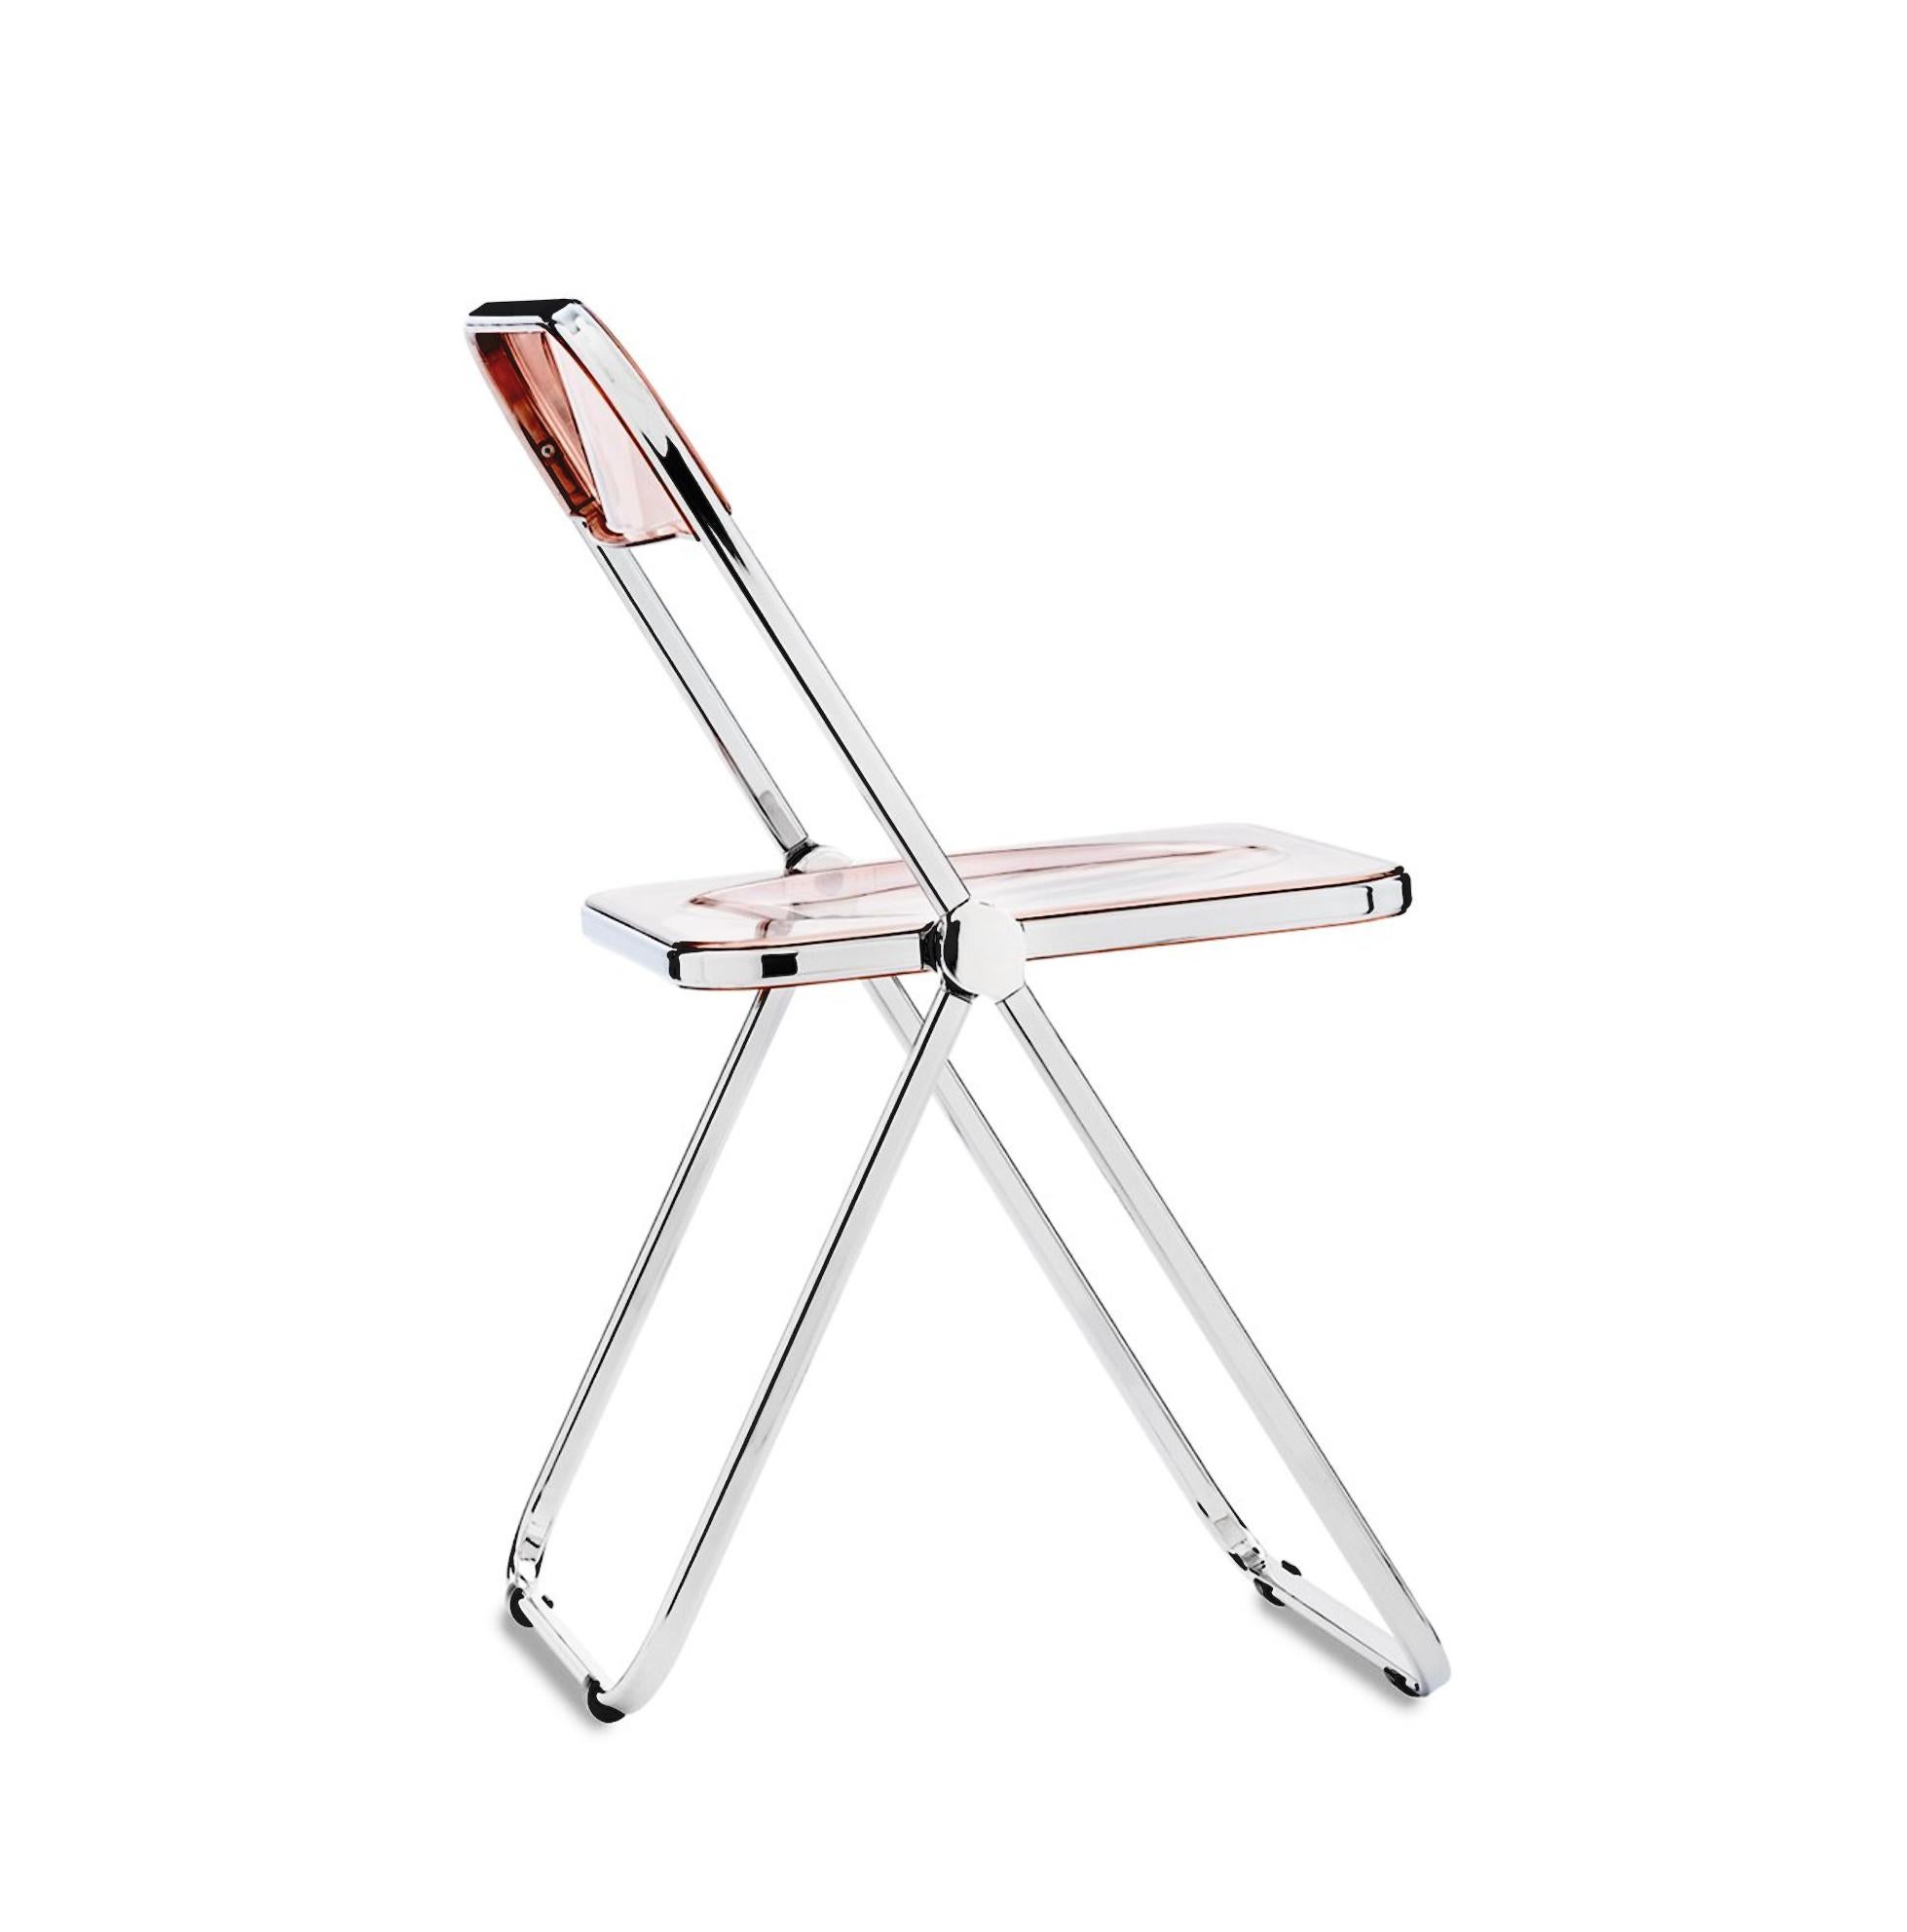 Set of 4 Lucite Pink and Chrome Plia Chairs, Piretti for Castelli, Italy 1970s For Sale 9